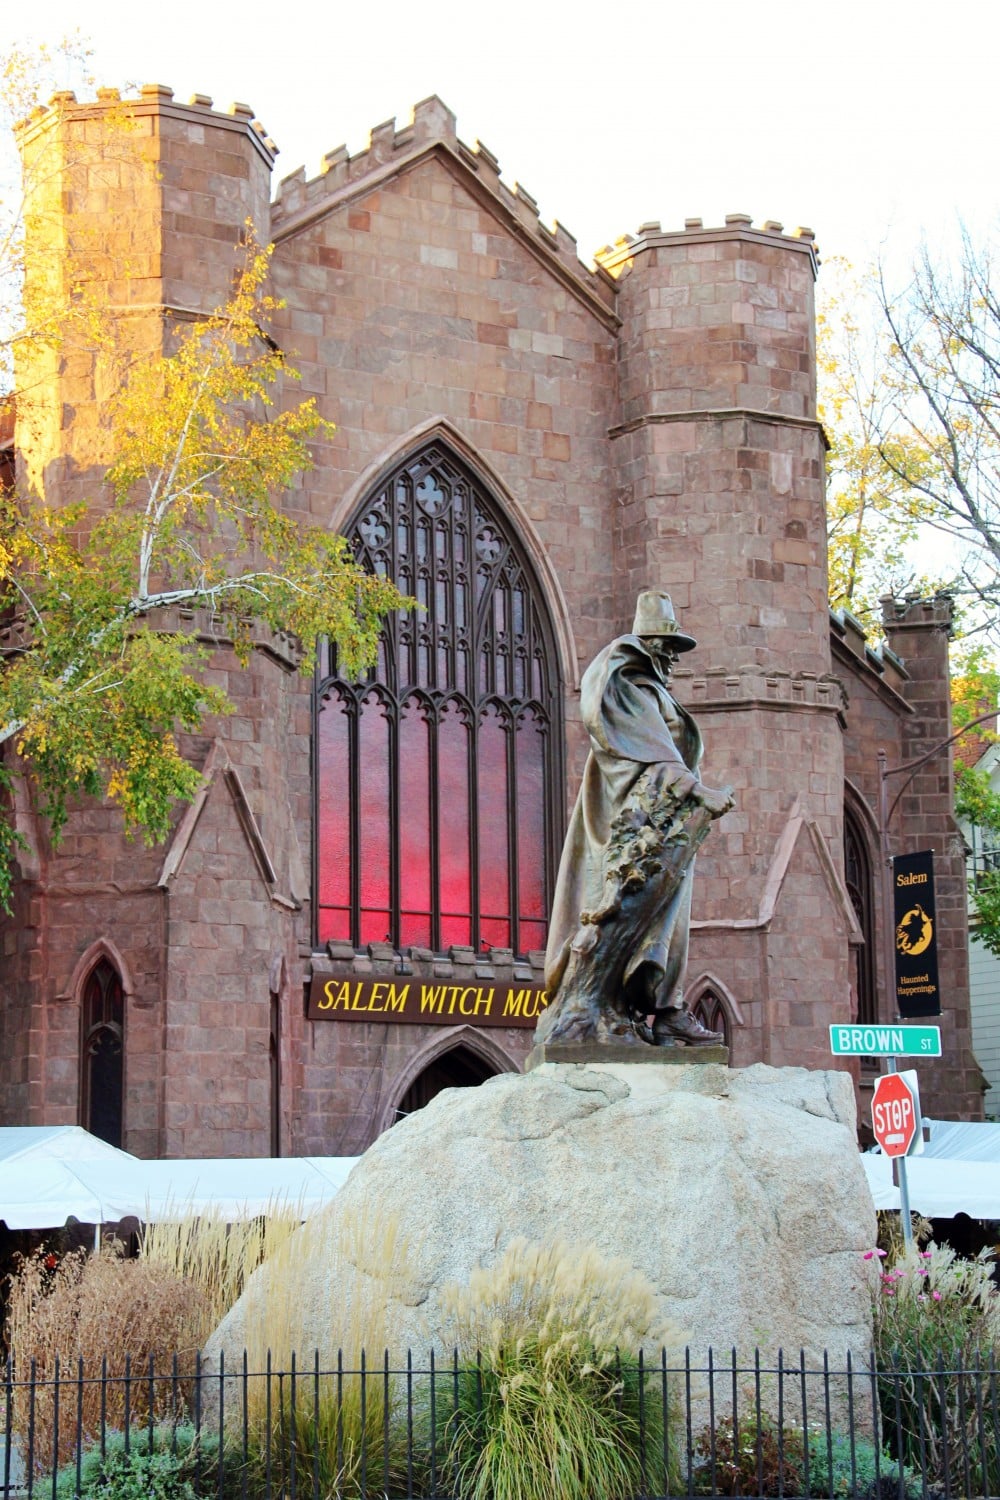 A statue of Roger Conant, the founder of Salem, in front of the Salem Witch Museum. For first time visitors to Salem, this museum will help make the witch trials comprehensible.